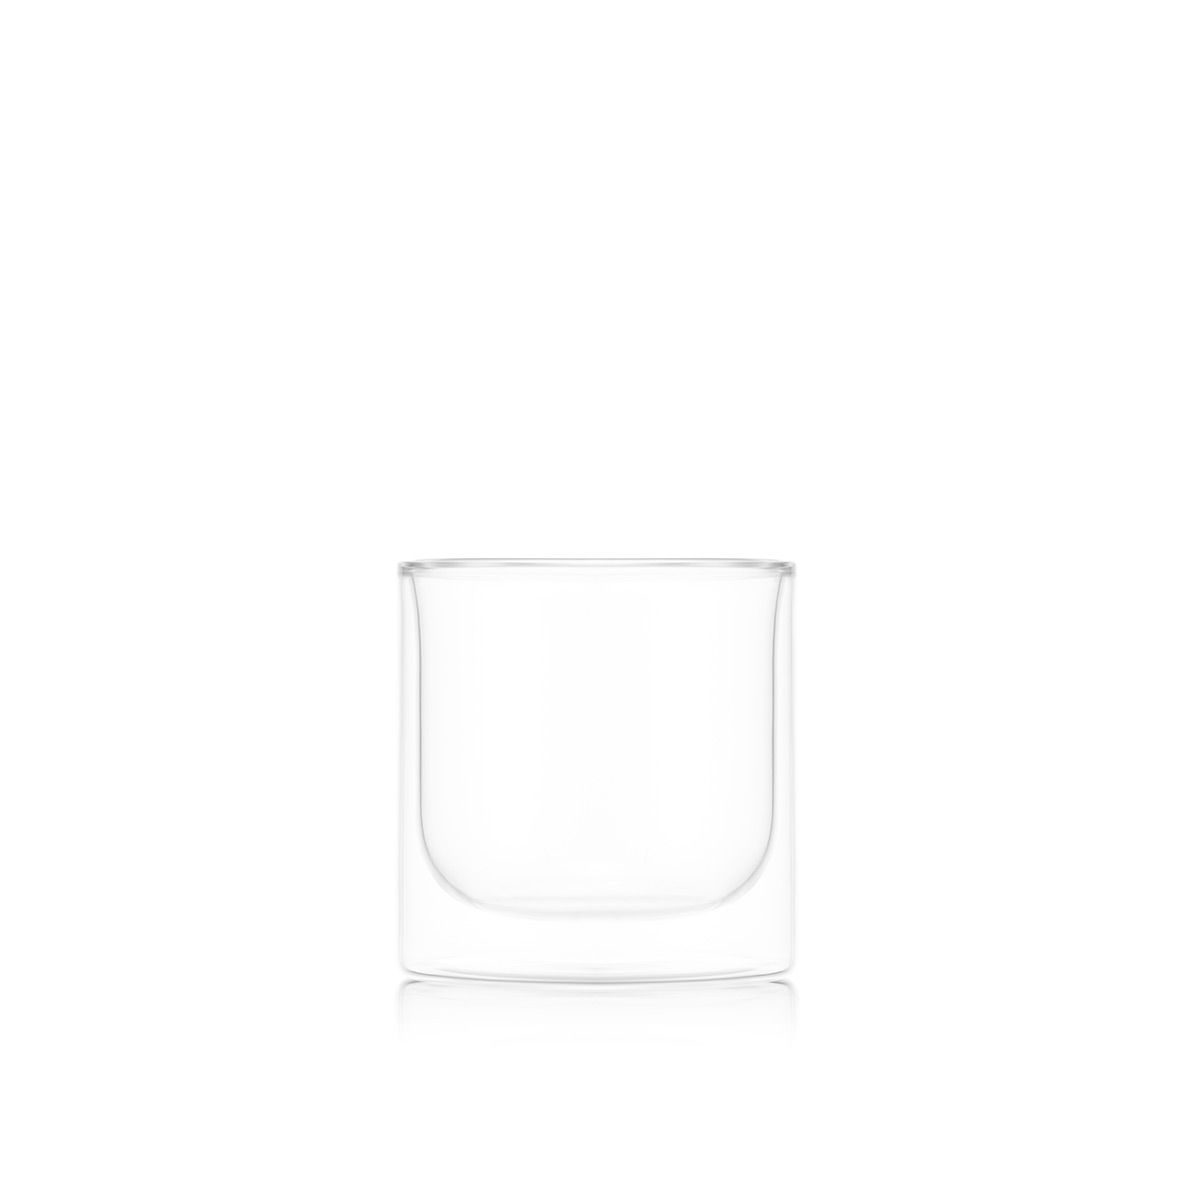 YWDL 150/250ml Double Wall Glass With Dish And Spoon Clear Glass